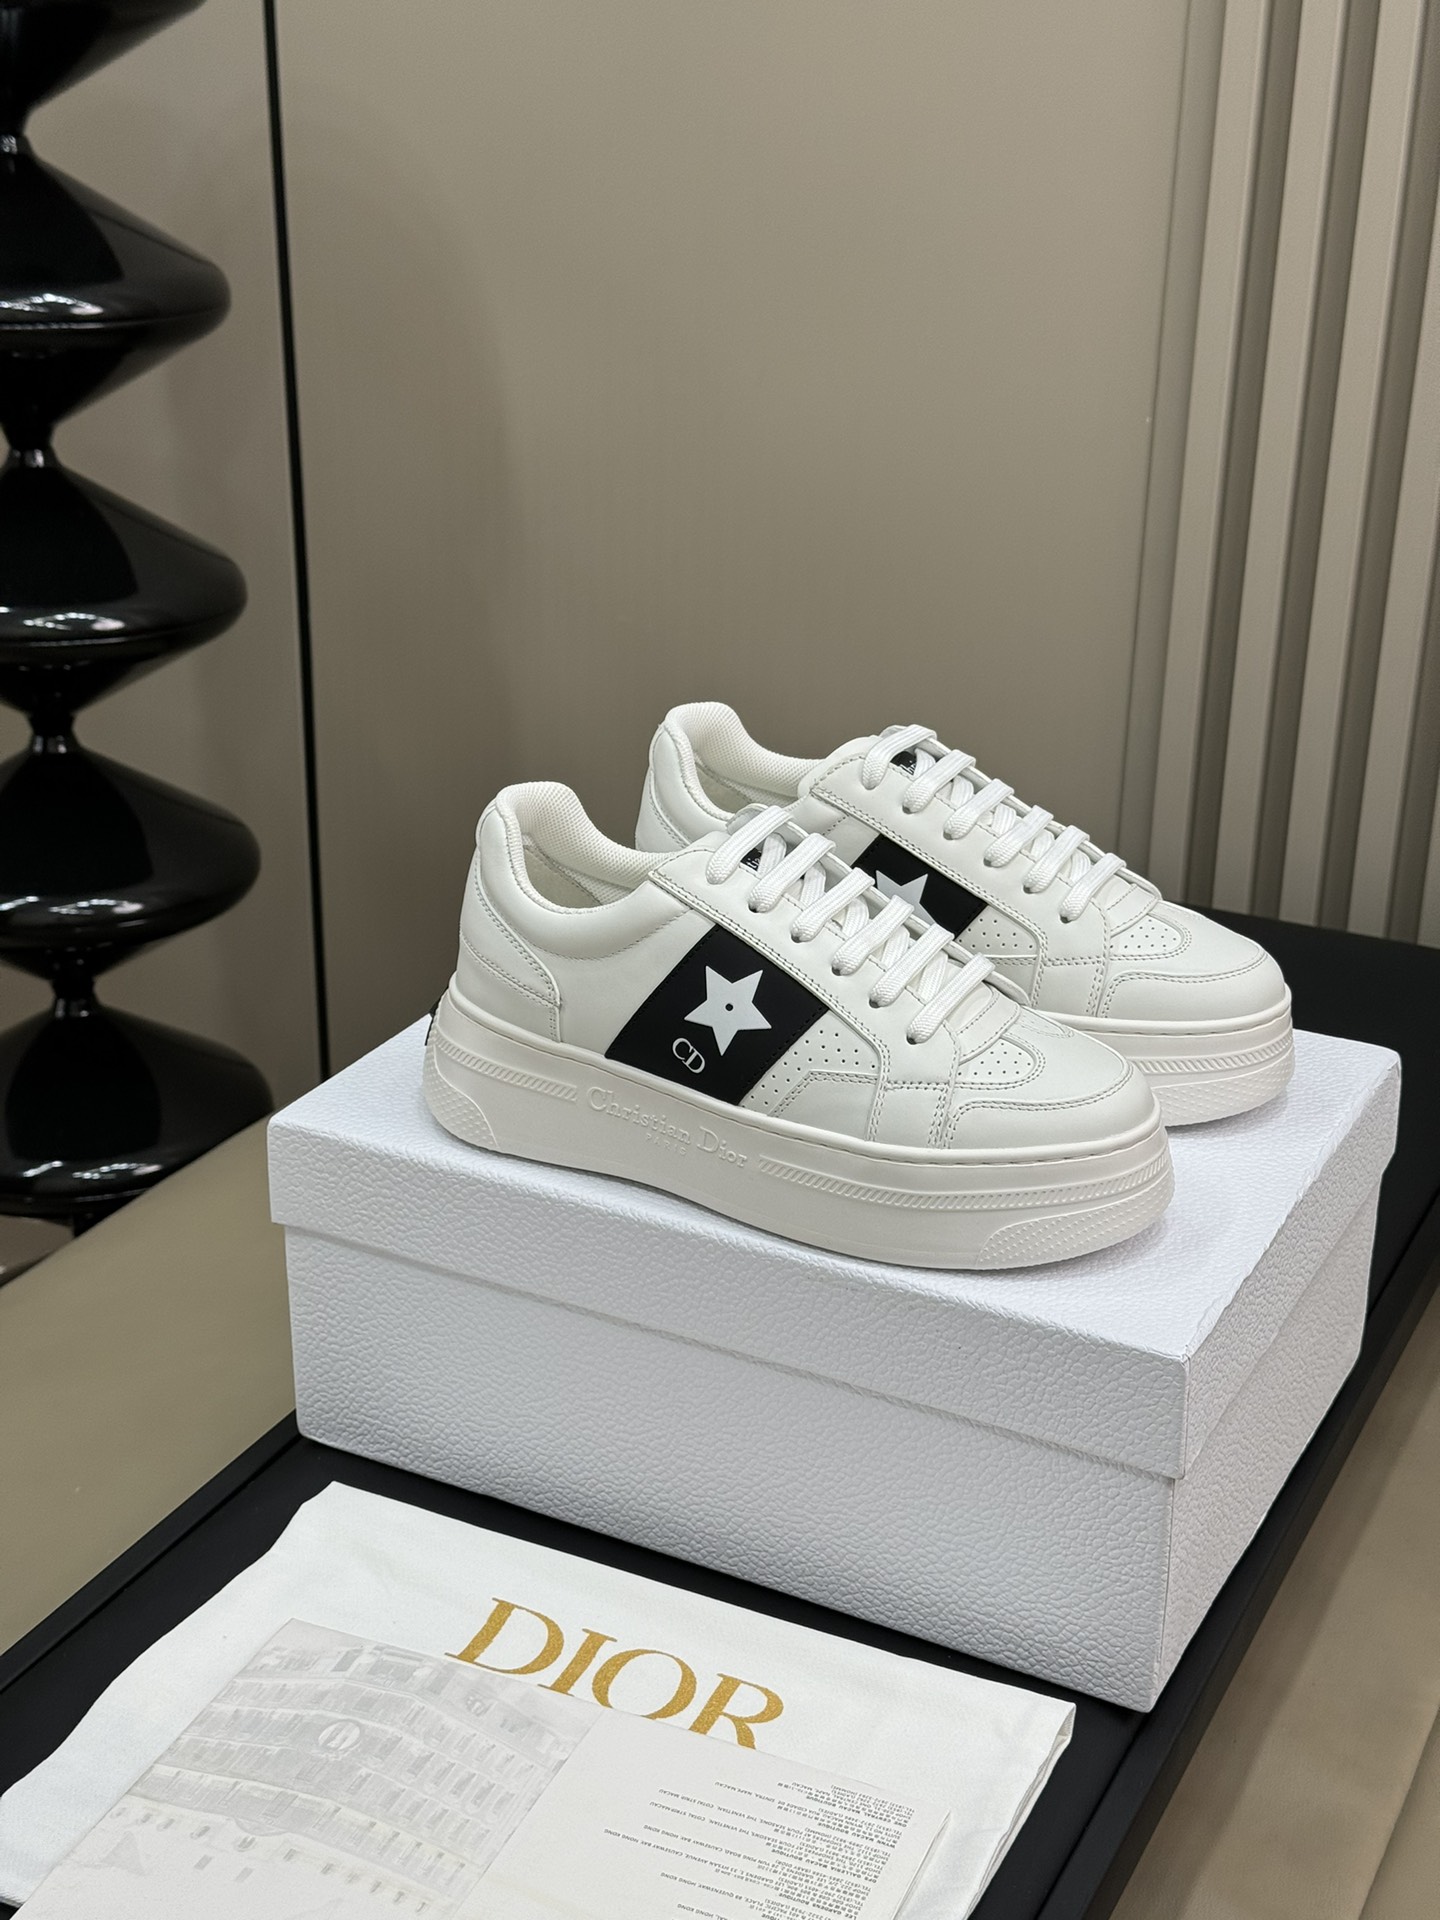 Dior Skateboard Shoes Black White Summer Collection